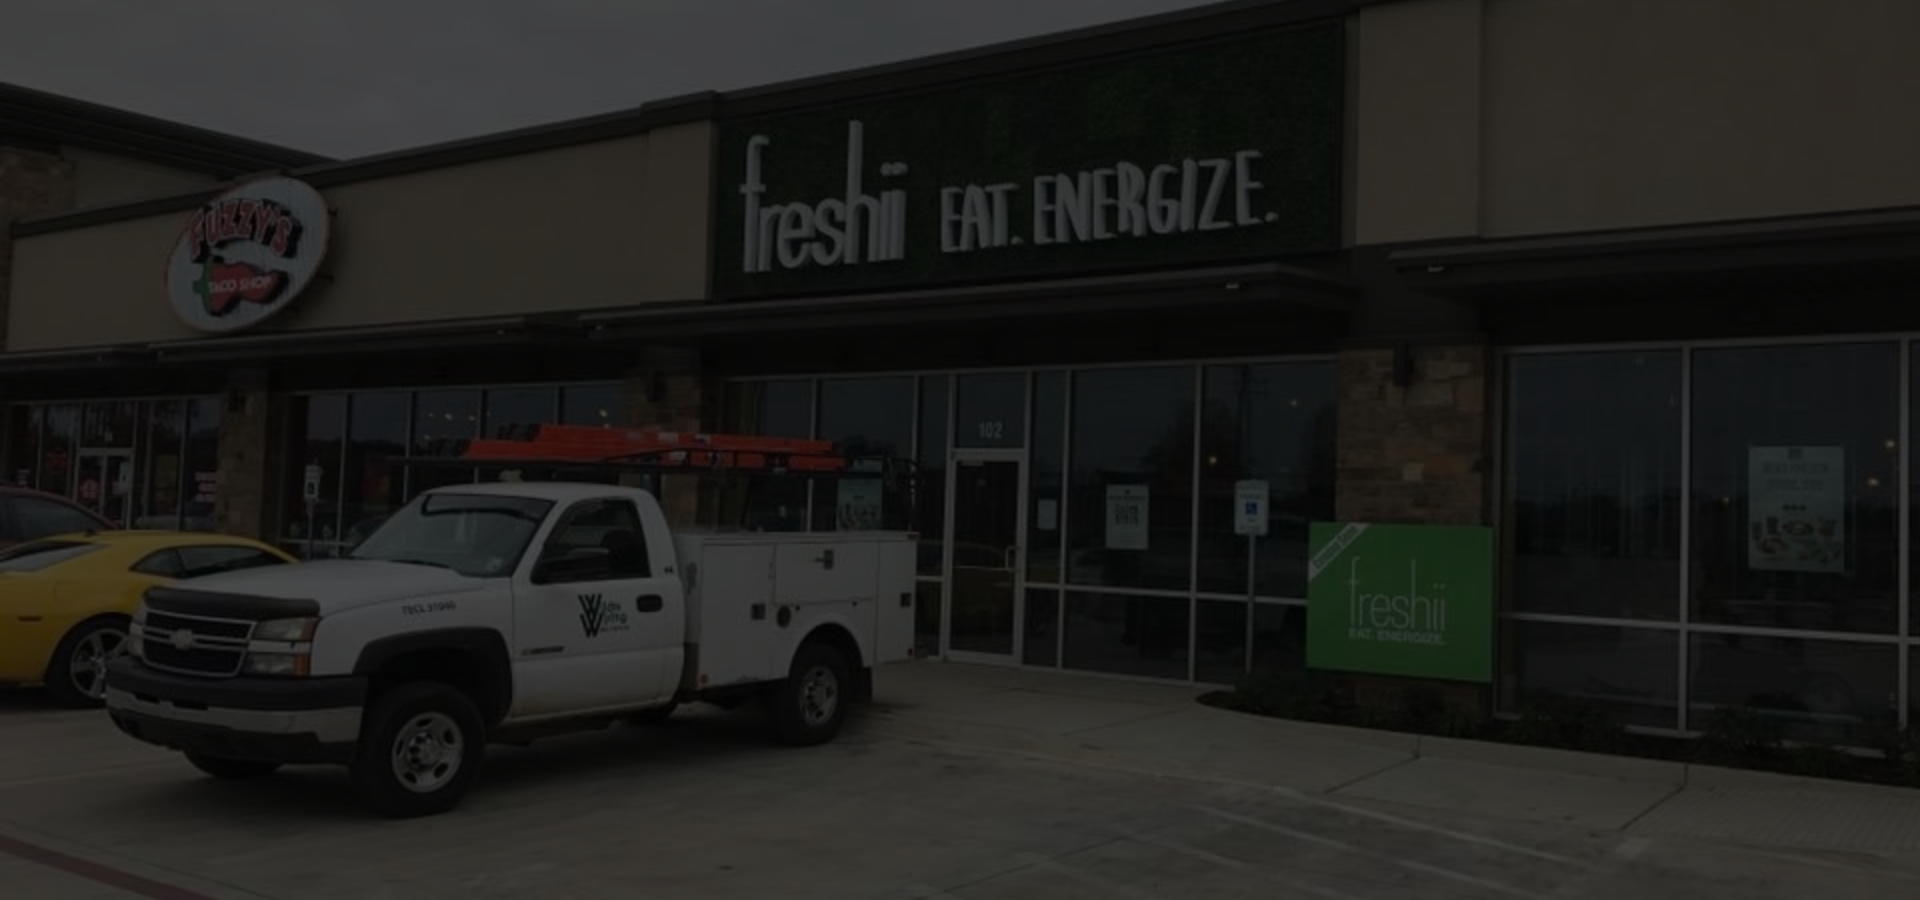 Wildts Wiring has worked with Freshii!